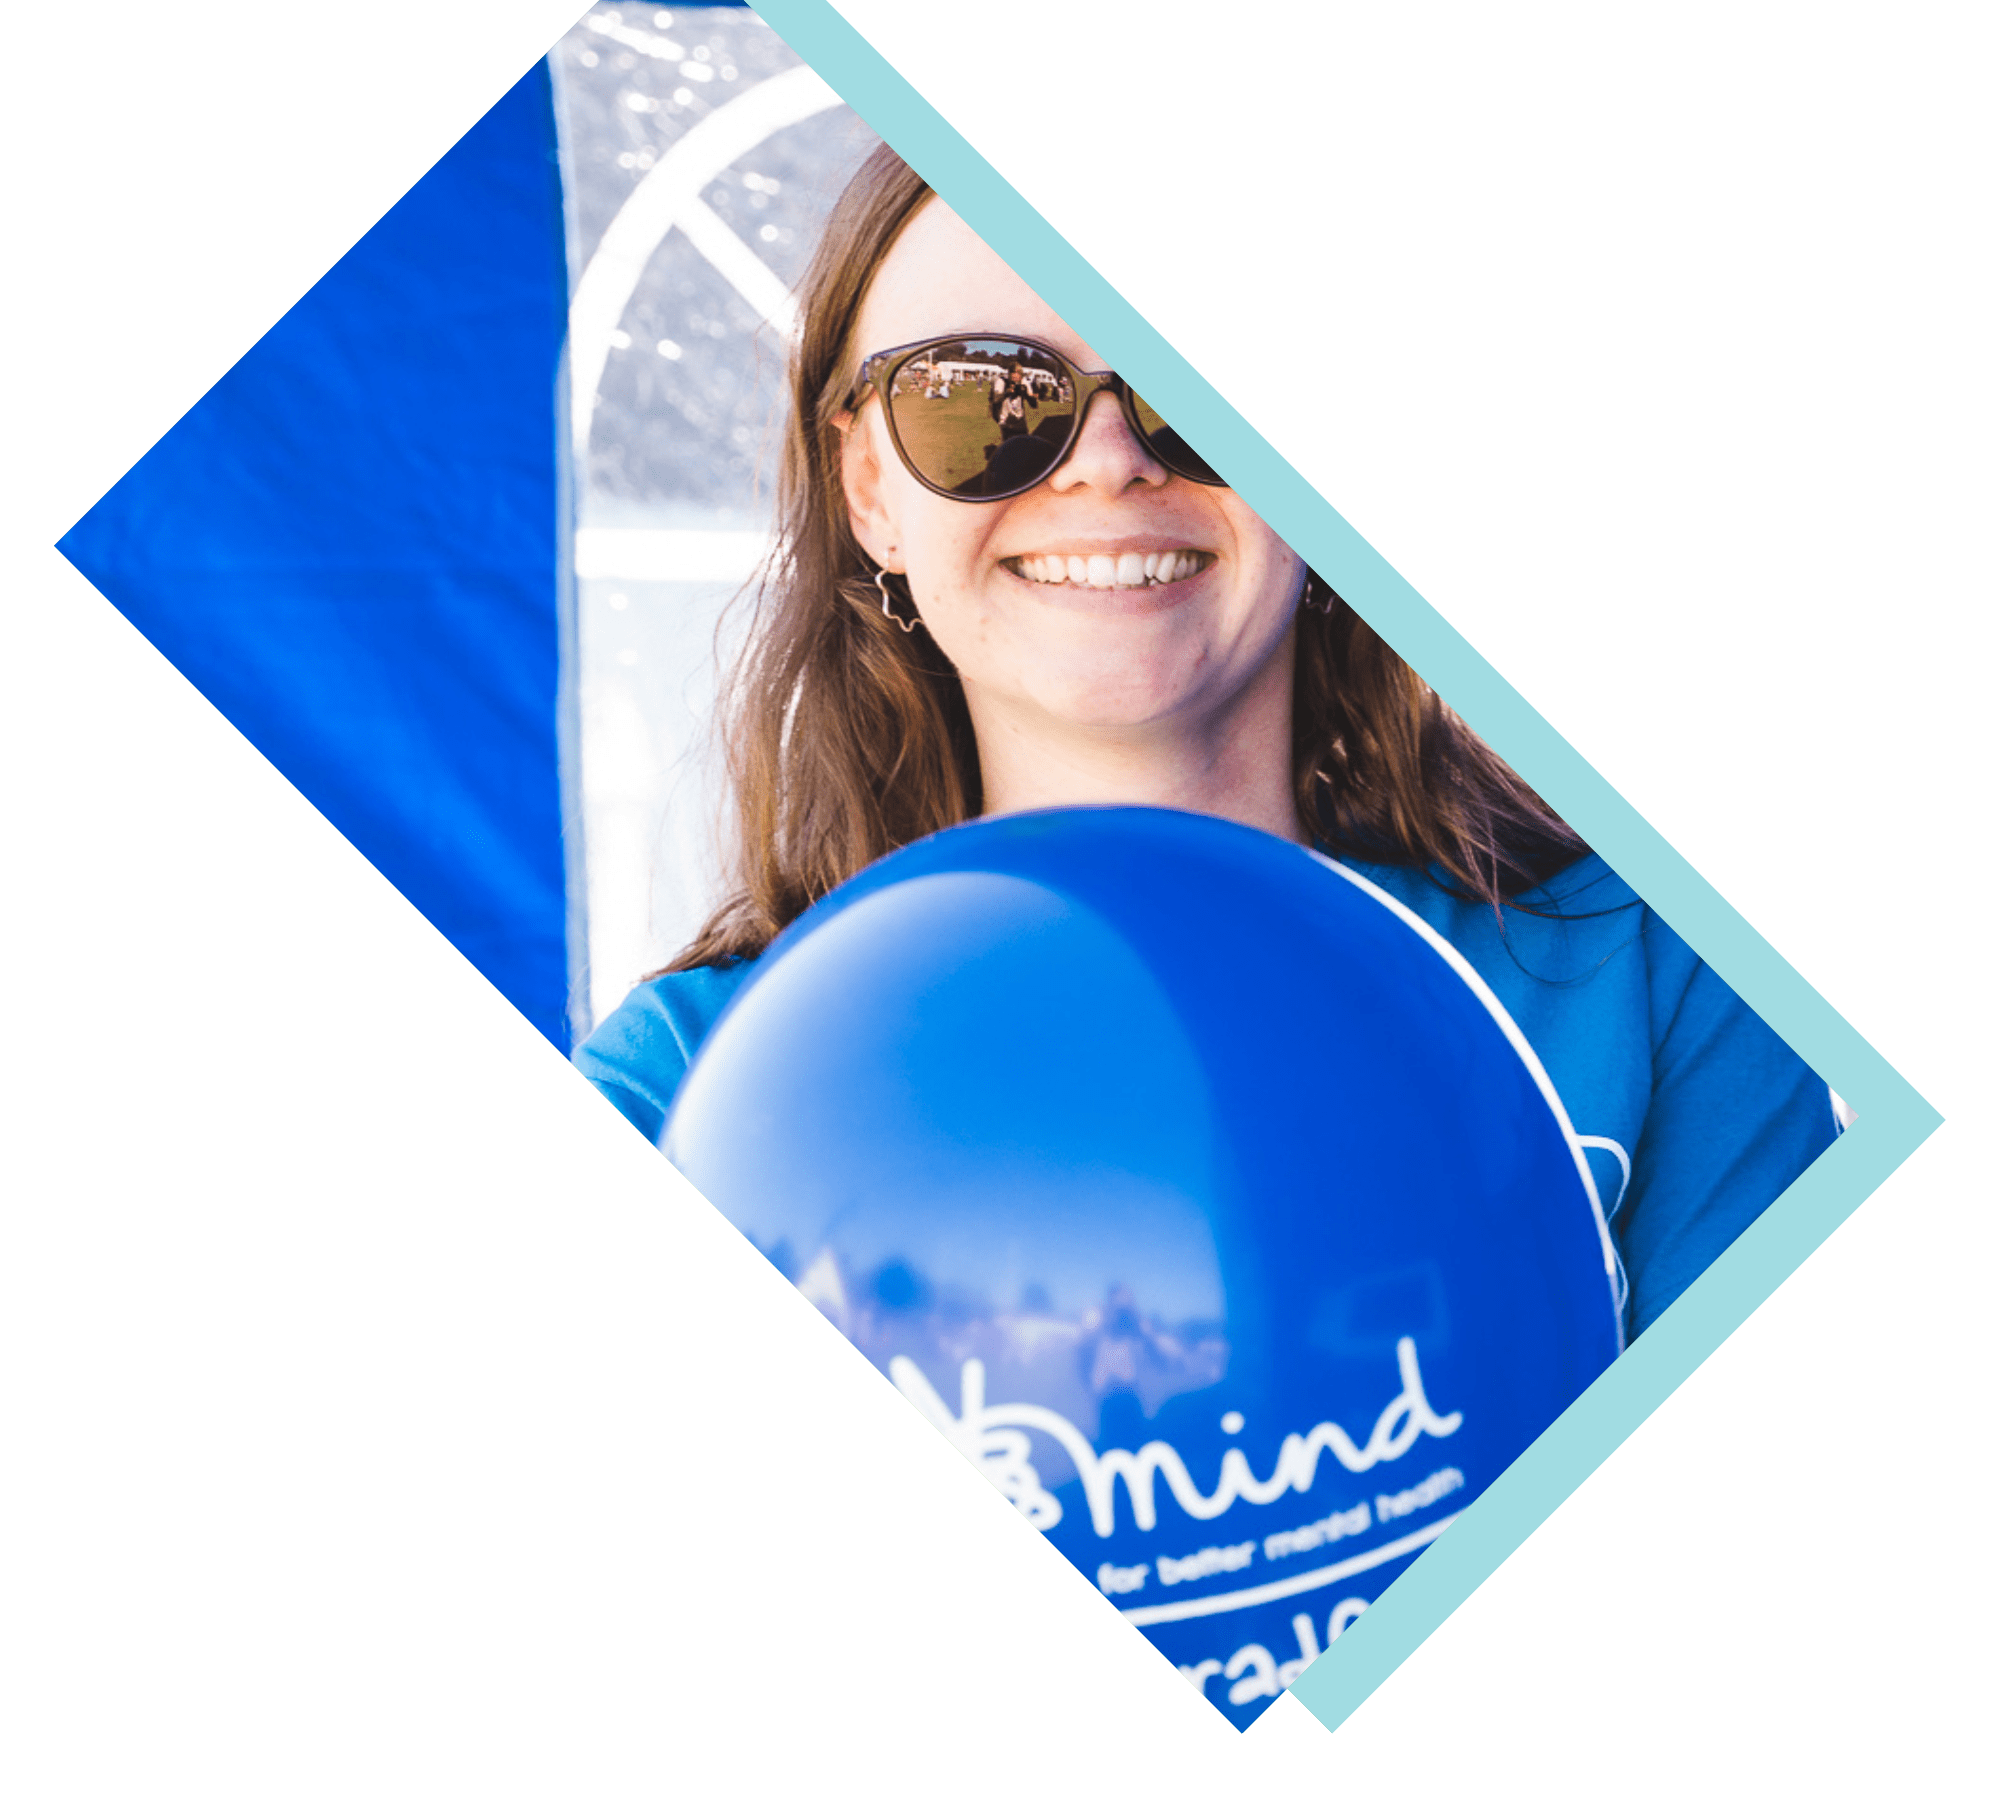 Charity fundraising for MIND mental health charity